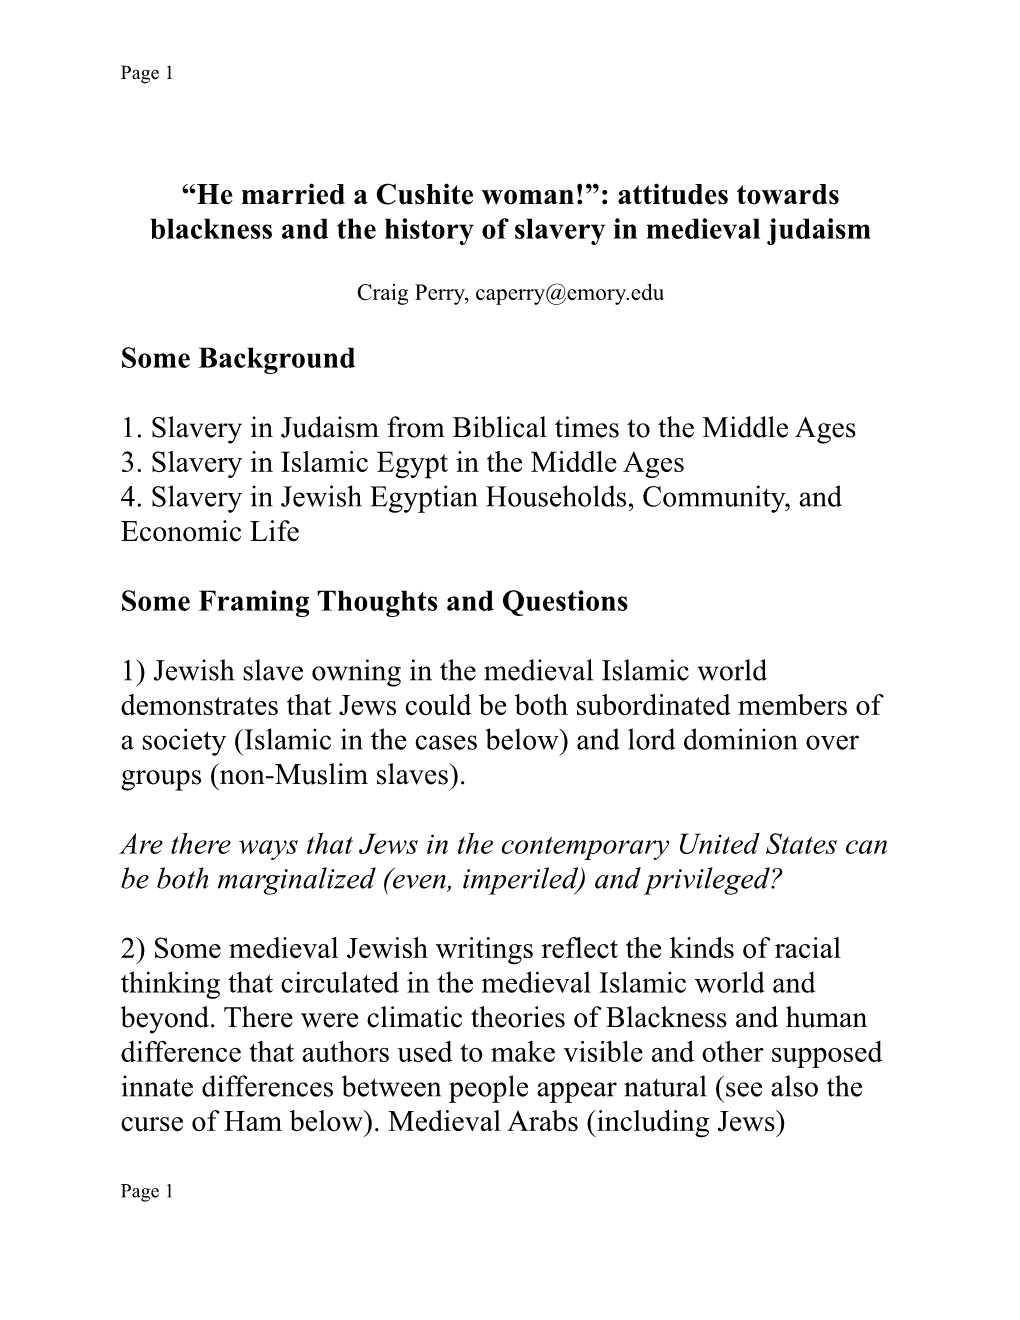 “He Married a Cushite Woman!”: Attitudes Towards Blackness and the History of Slavery in Medieval Judaism